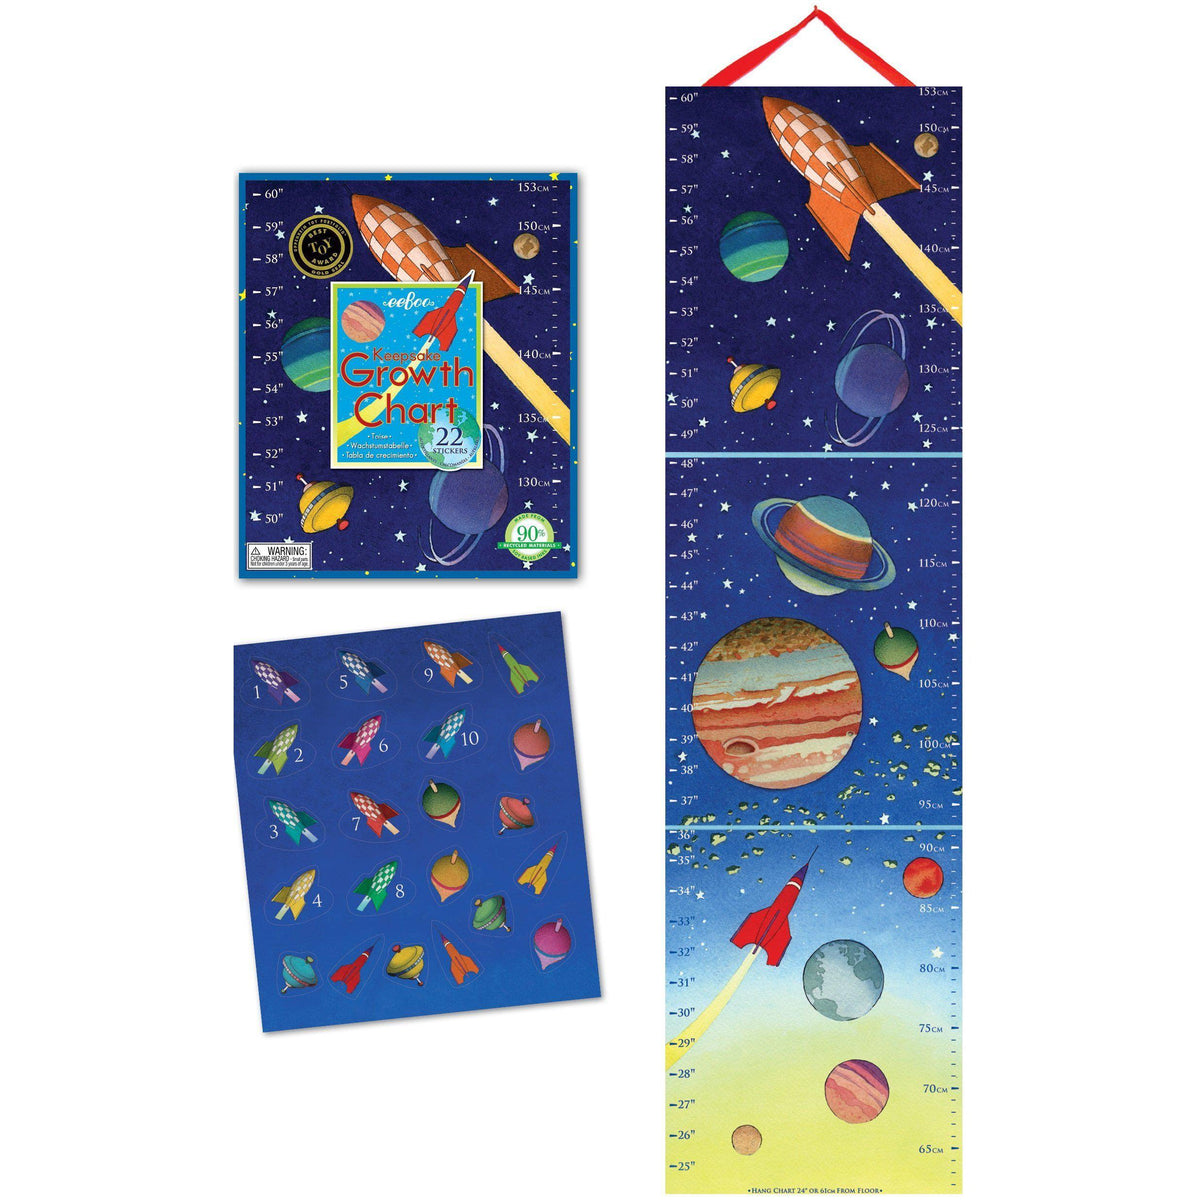 Front view of the contents included in the space growth chart.